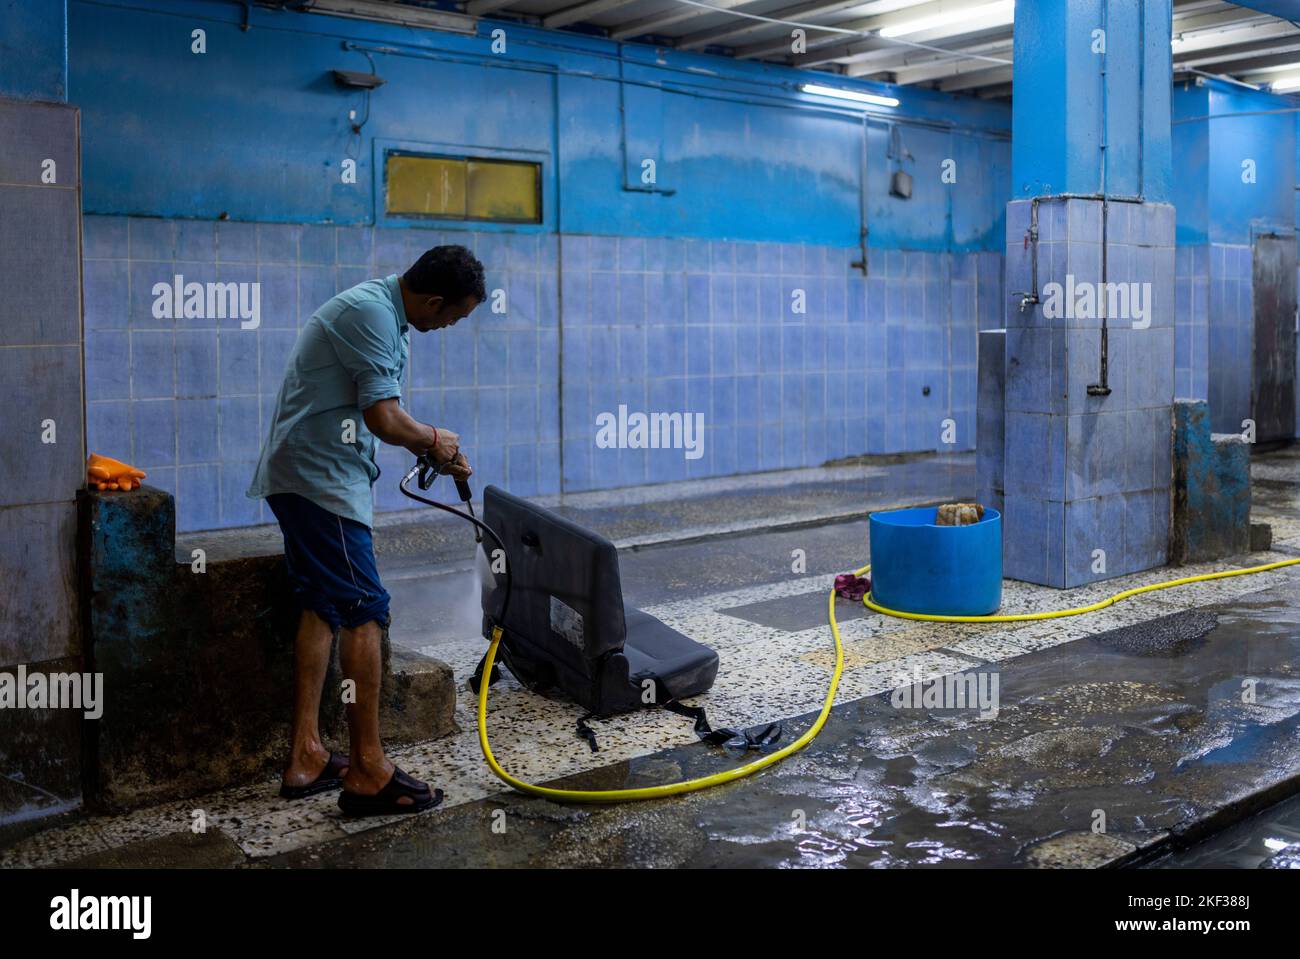 15.11.2022, Doha Katar Qatar Man cleaning seats in a car wash Doha 4 days before the city hosts the Fifa World Cup 2022  Foto: Moritz Müller  Copyrigh Stock Photo